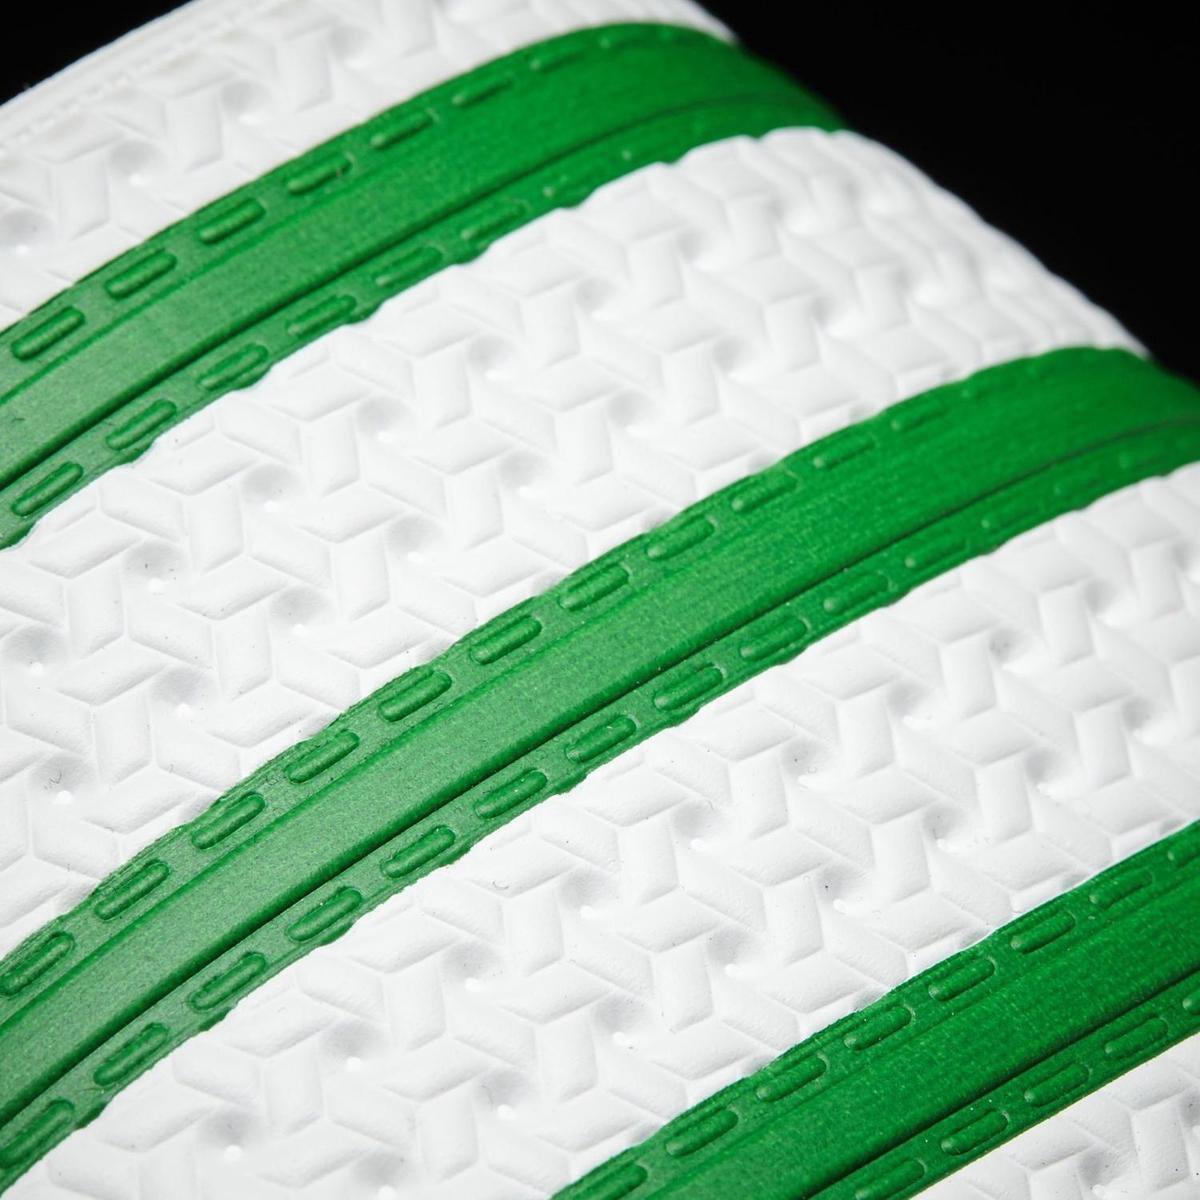 adidas slippers groen wit